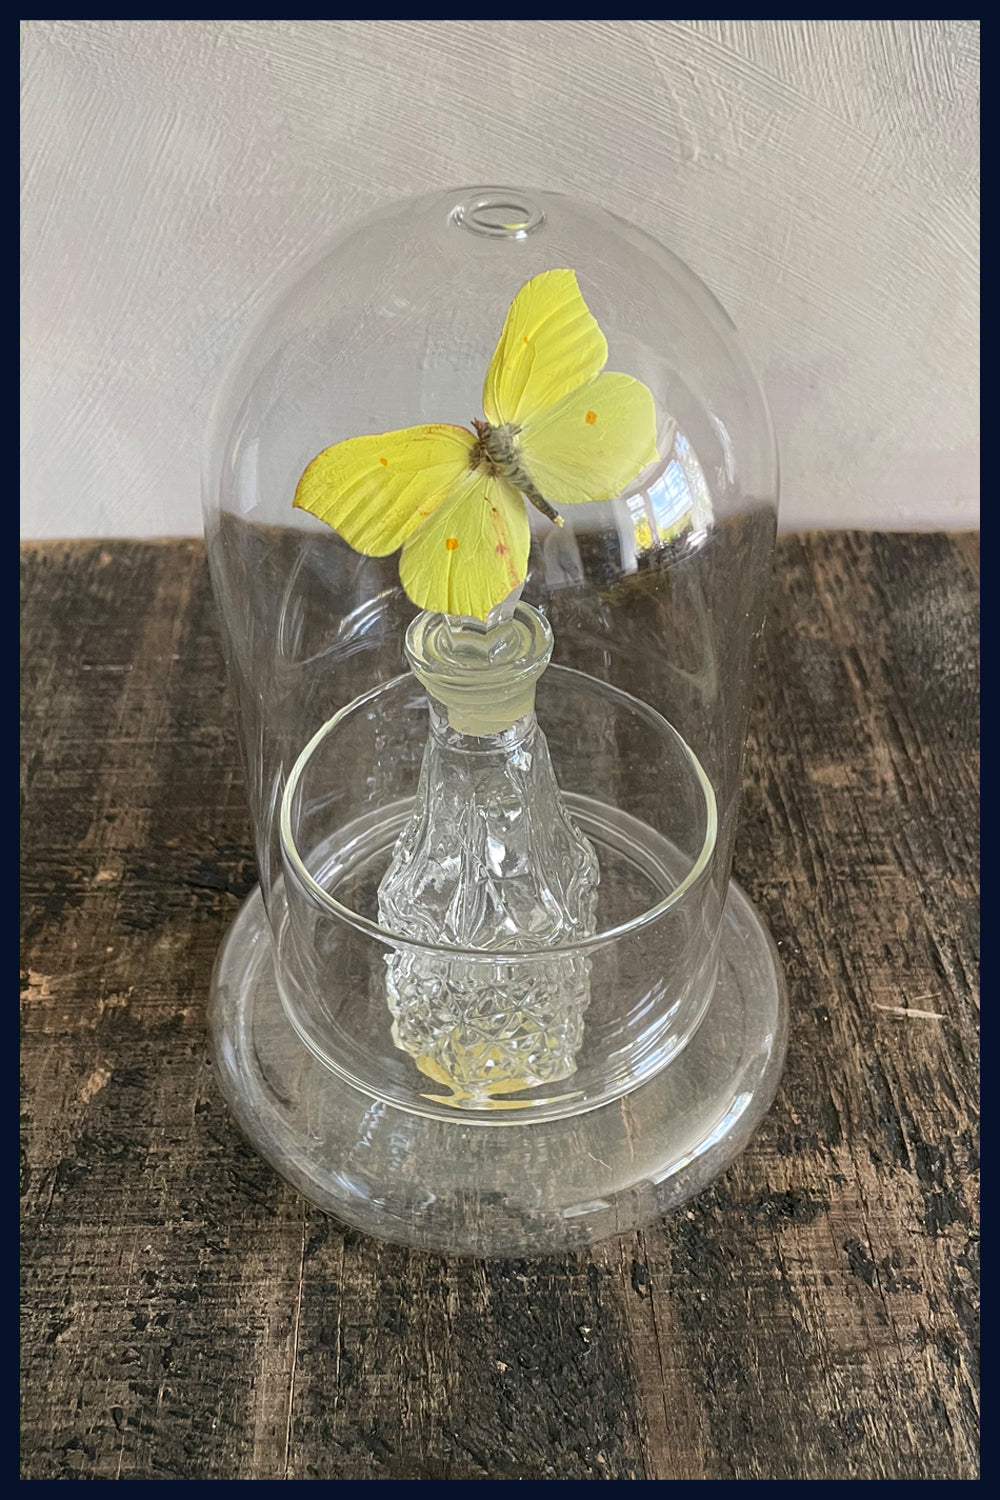 Enigma Variations Collection: Vintage Perfume Bottle with a Vintage Yellow Butterfly in a Glass Display Dome